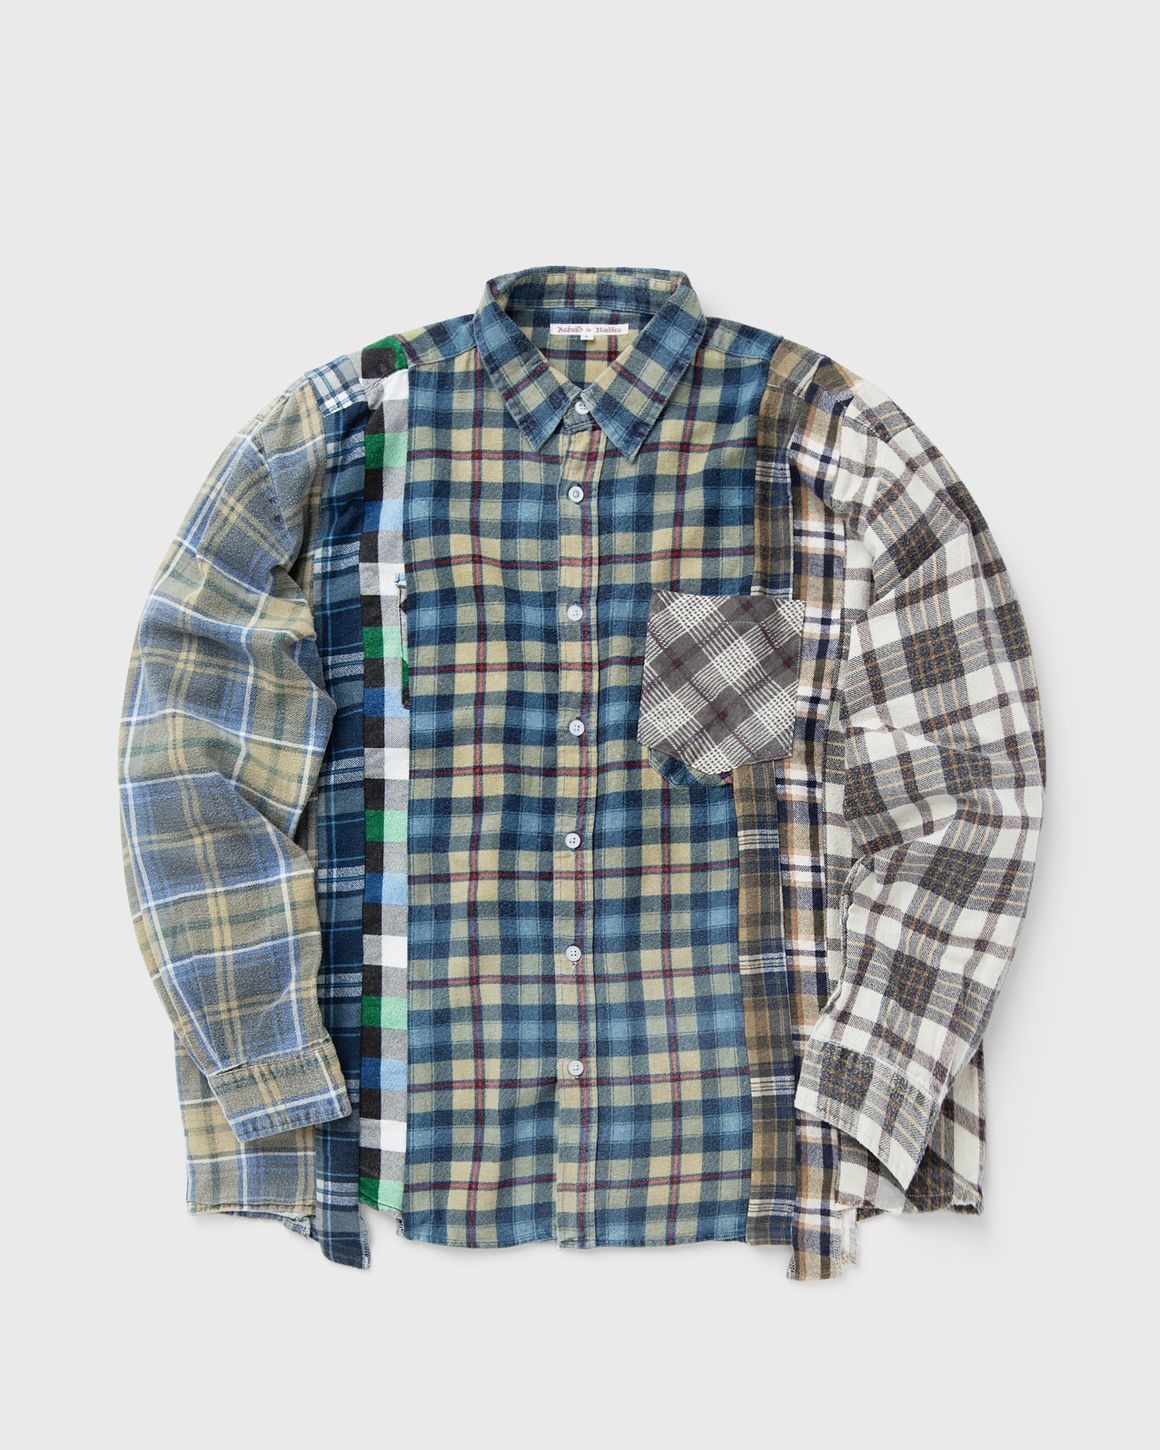 Rebuild by Flannel Shirt - 1